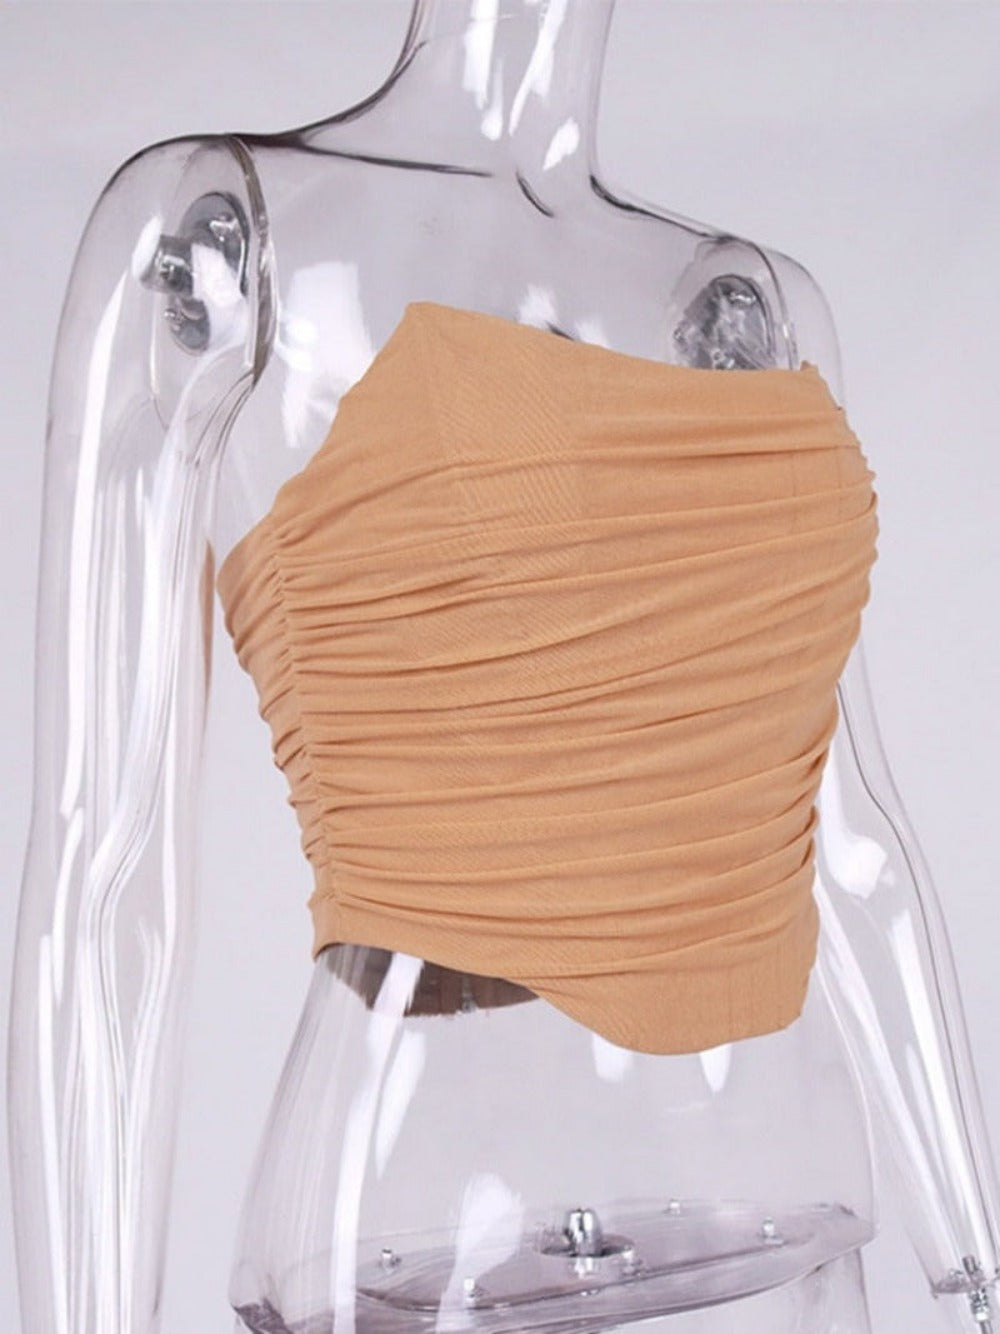 Everyday.Discount buy sleeveless mesh ruched bratop instagram summer bust crop bra's scarf tiktok customers solid backless wrap corset pinterest bodyscarf shoulderless women's moda facebookusa skinny elastic summer bust bodytop usa crop bratops europe styles solid moda wear with skirt heels leggings pant trousers onlineshop everyday.discount everyday free.shipping 